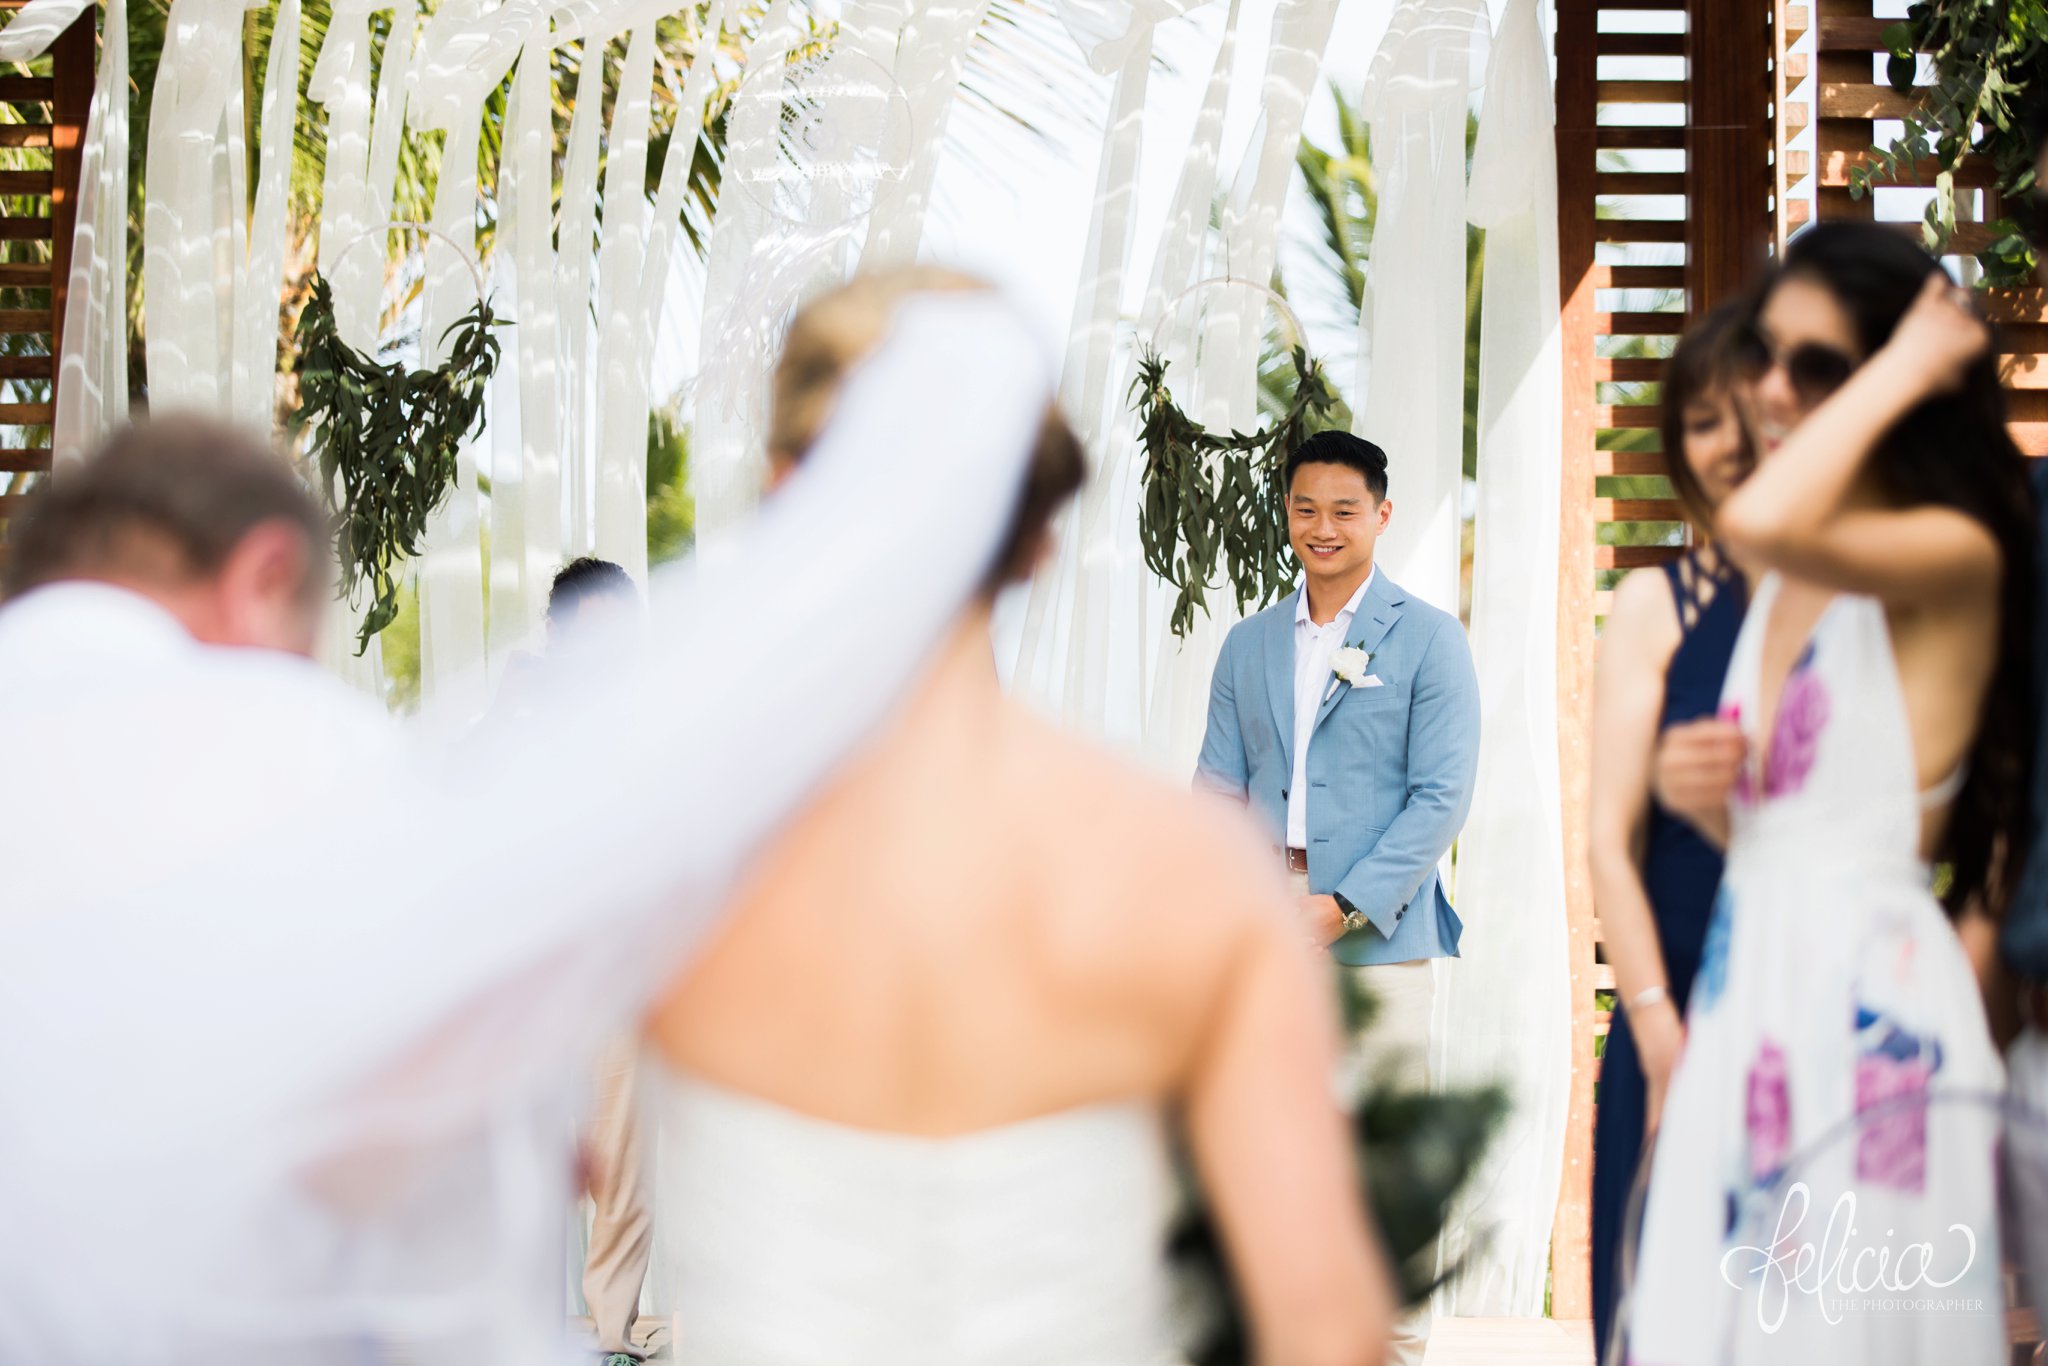 images by feliciathephotographer.com | Destination Beach Wedding | Unicco 20 87 | Photographer | L&S Travel | ceremony | walking down the isle | groom waiting for bride | white canopy | wood gazebo | palm trees | ocean view | blue jacket | veil 